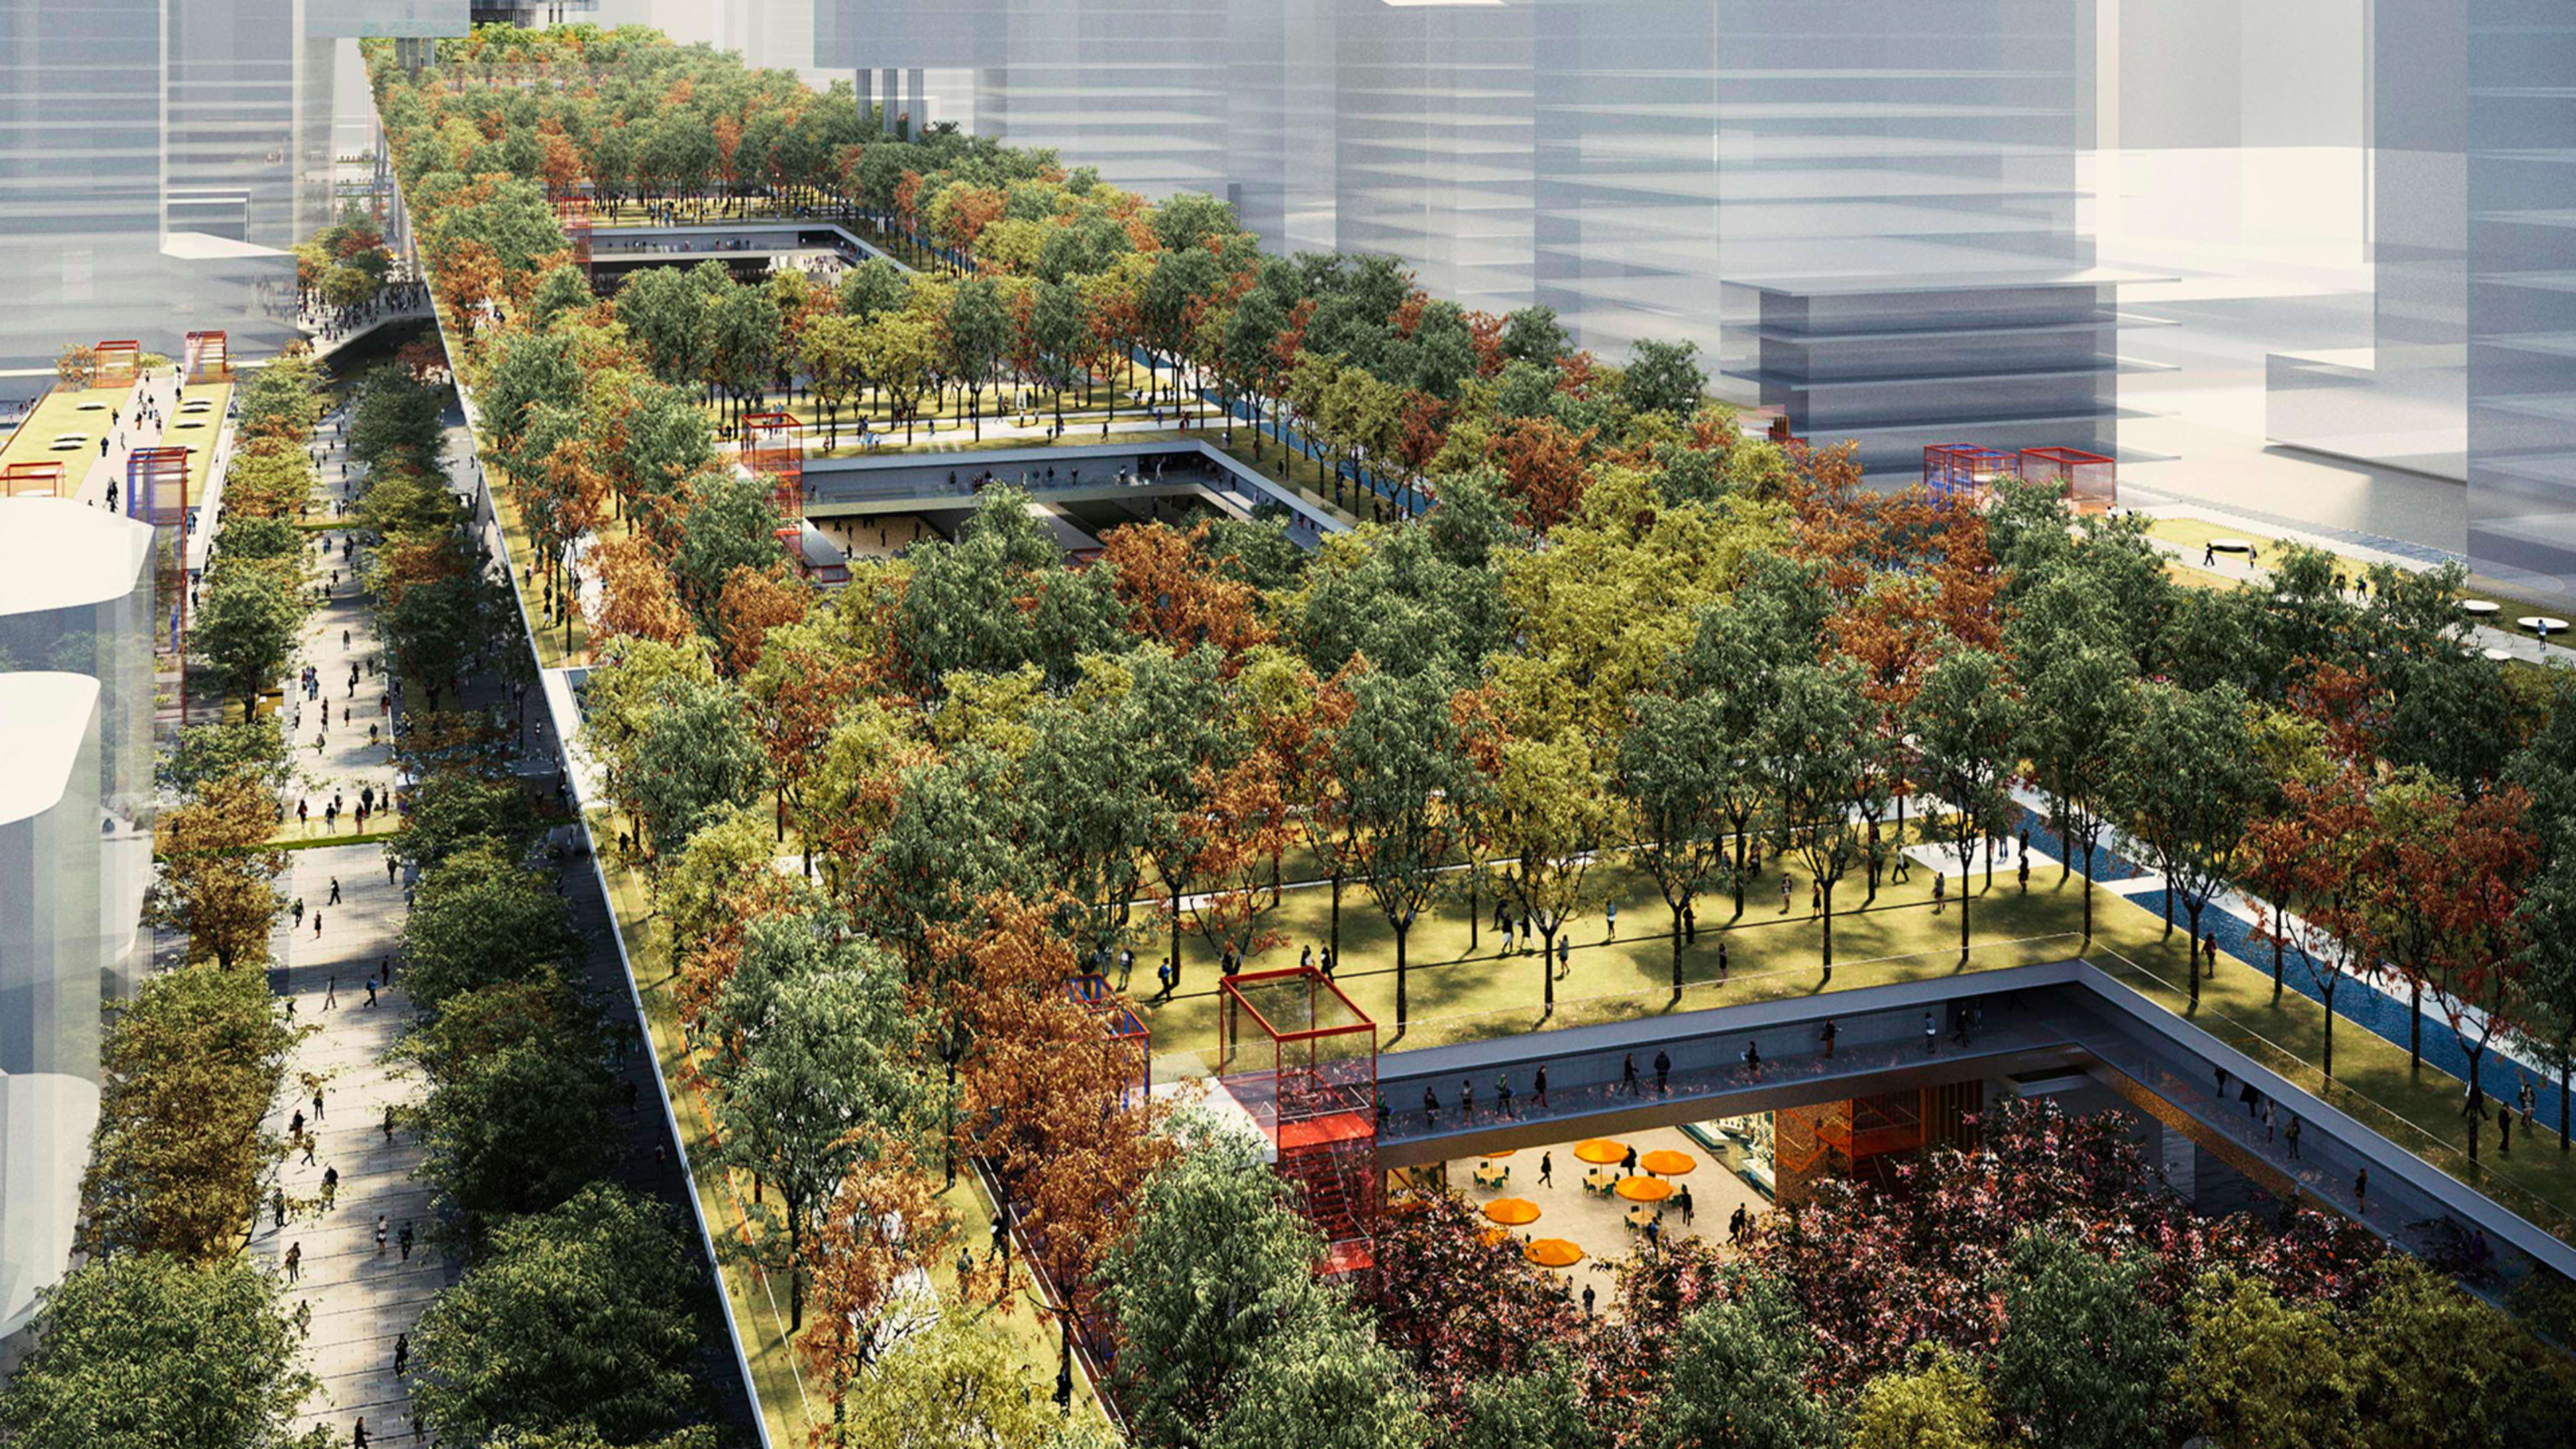 Shenzhen is building a mile-long superhighway for trees